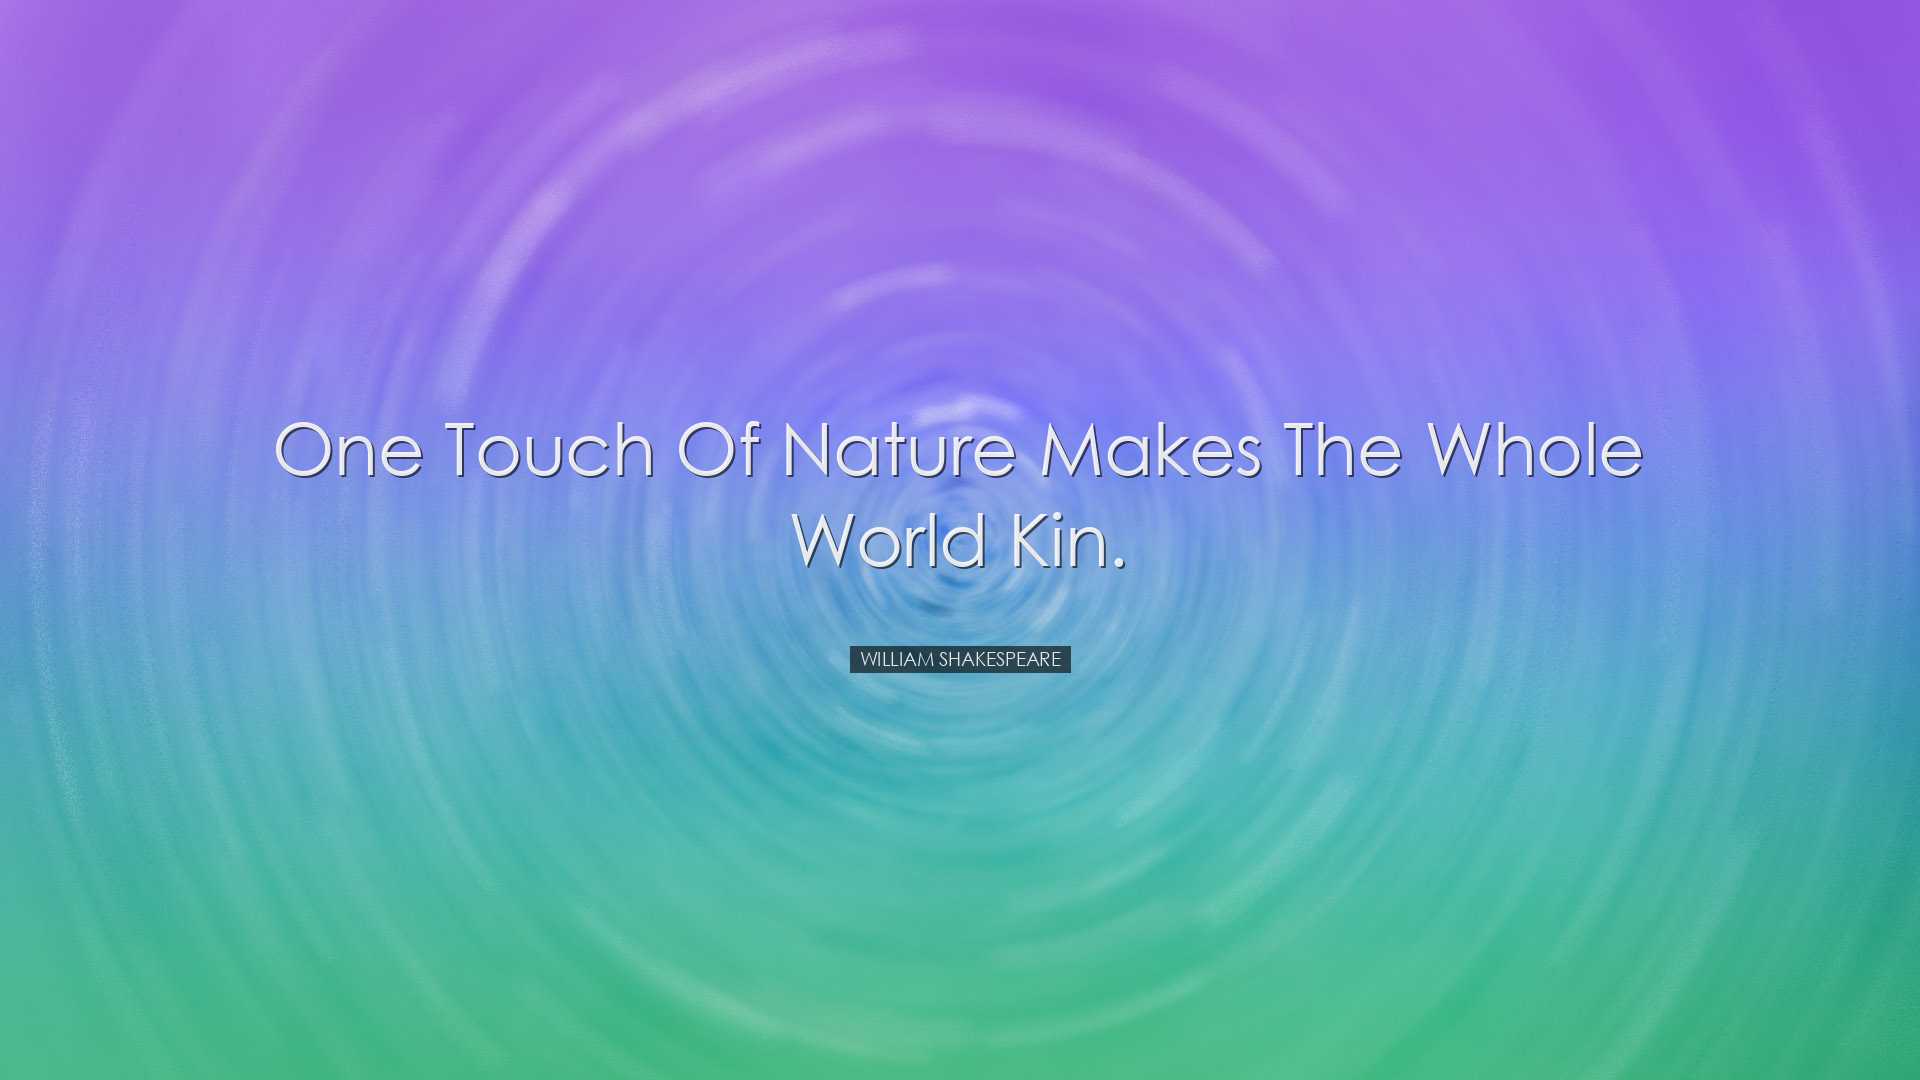 One touch of nature makes the whole world kin. - William Shakespea